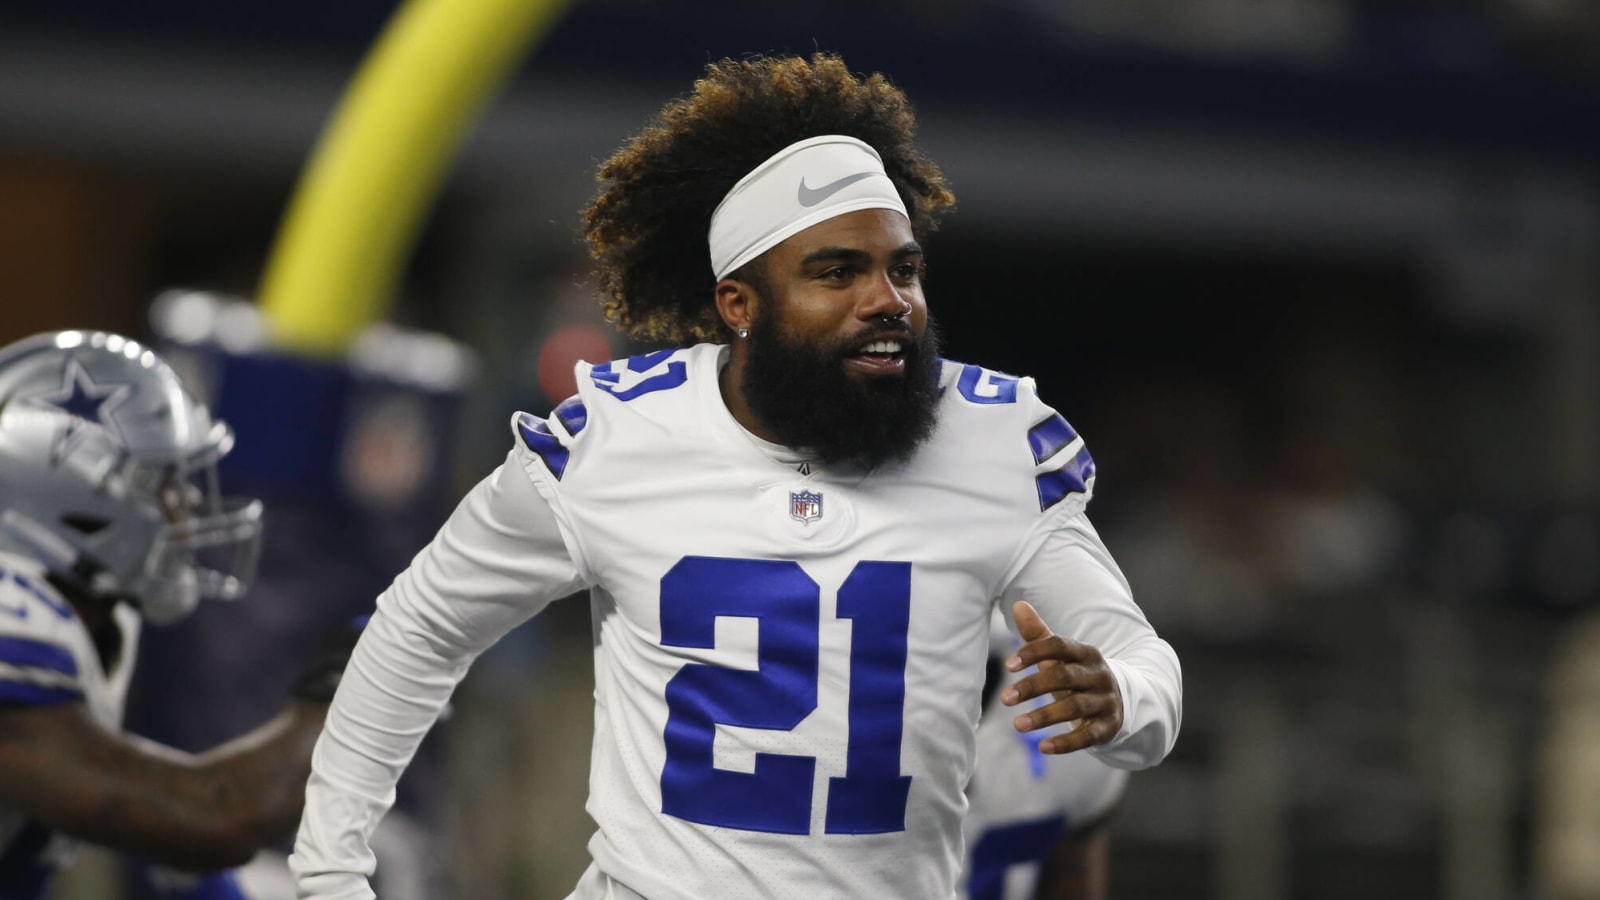 Jerry Jones: 'We go as Zeke goes.' But can Cowboys count on RB